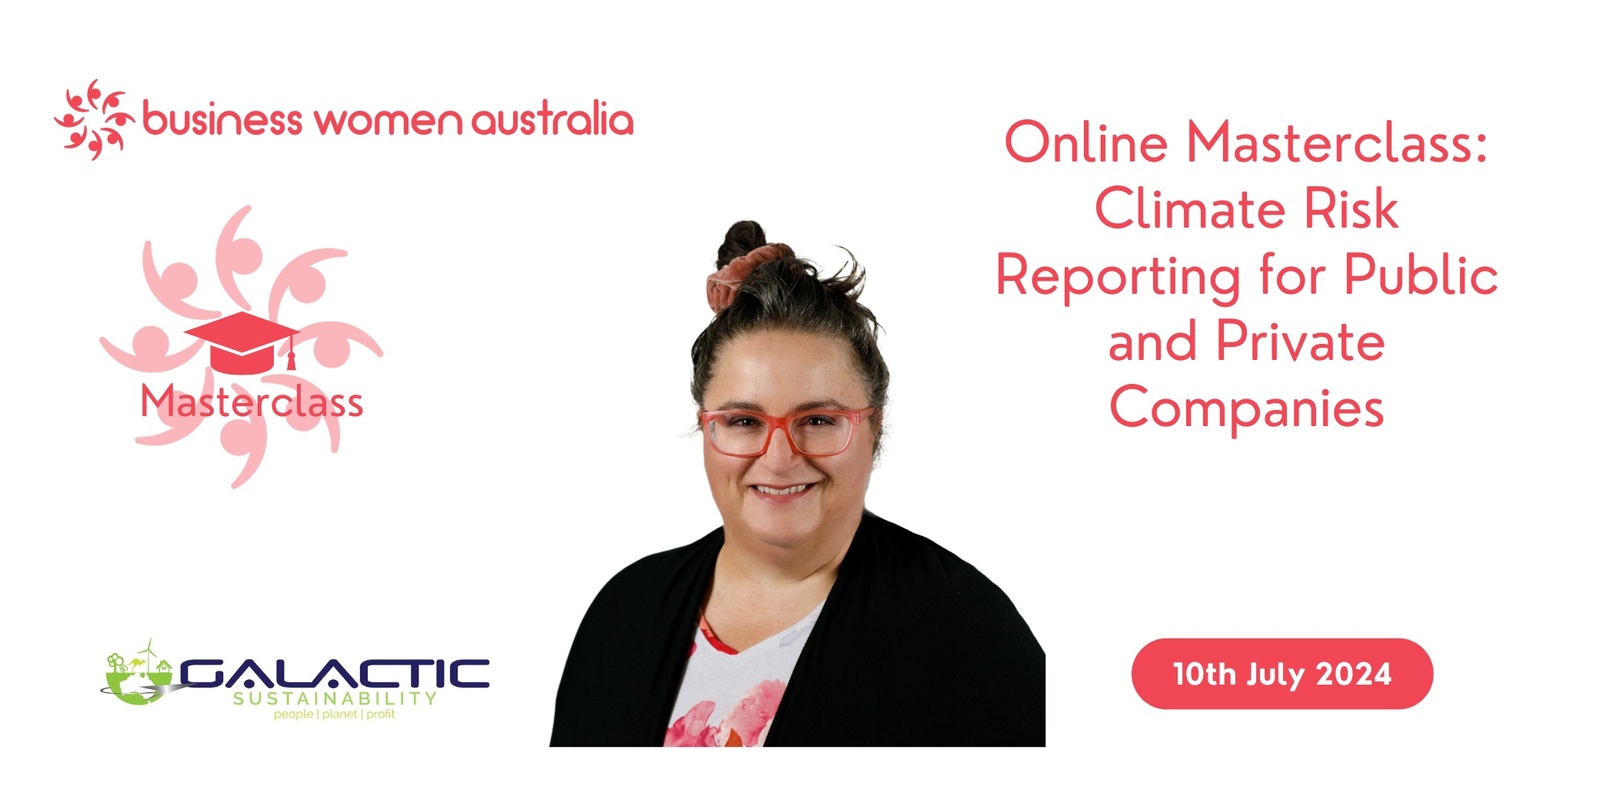 Banner image for Online Masterclass: Climate Risk Reporting for Public and Private Companies 